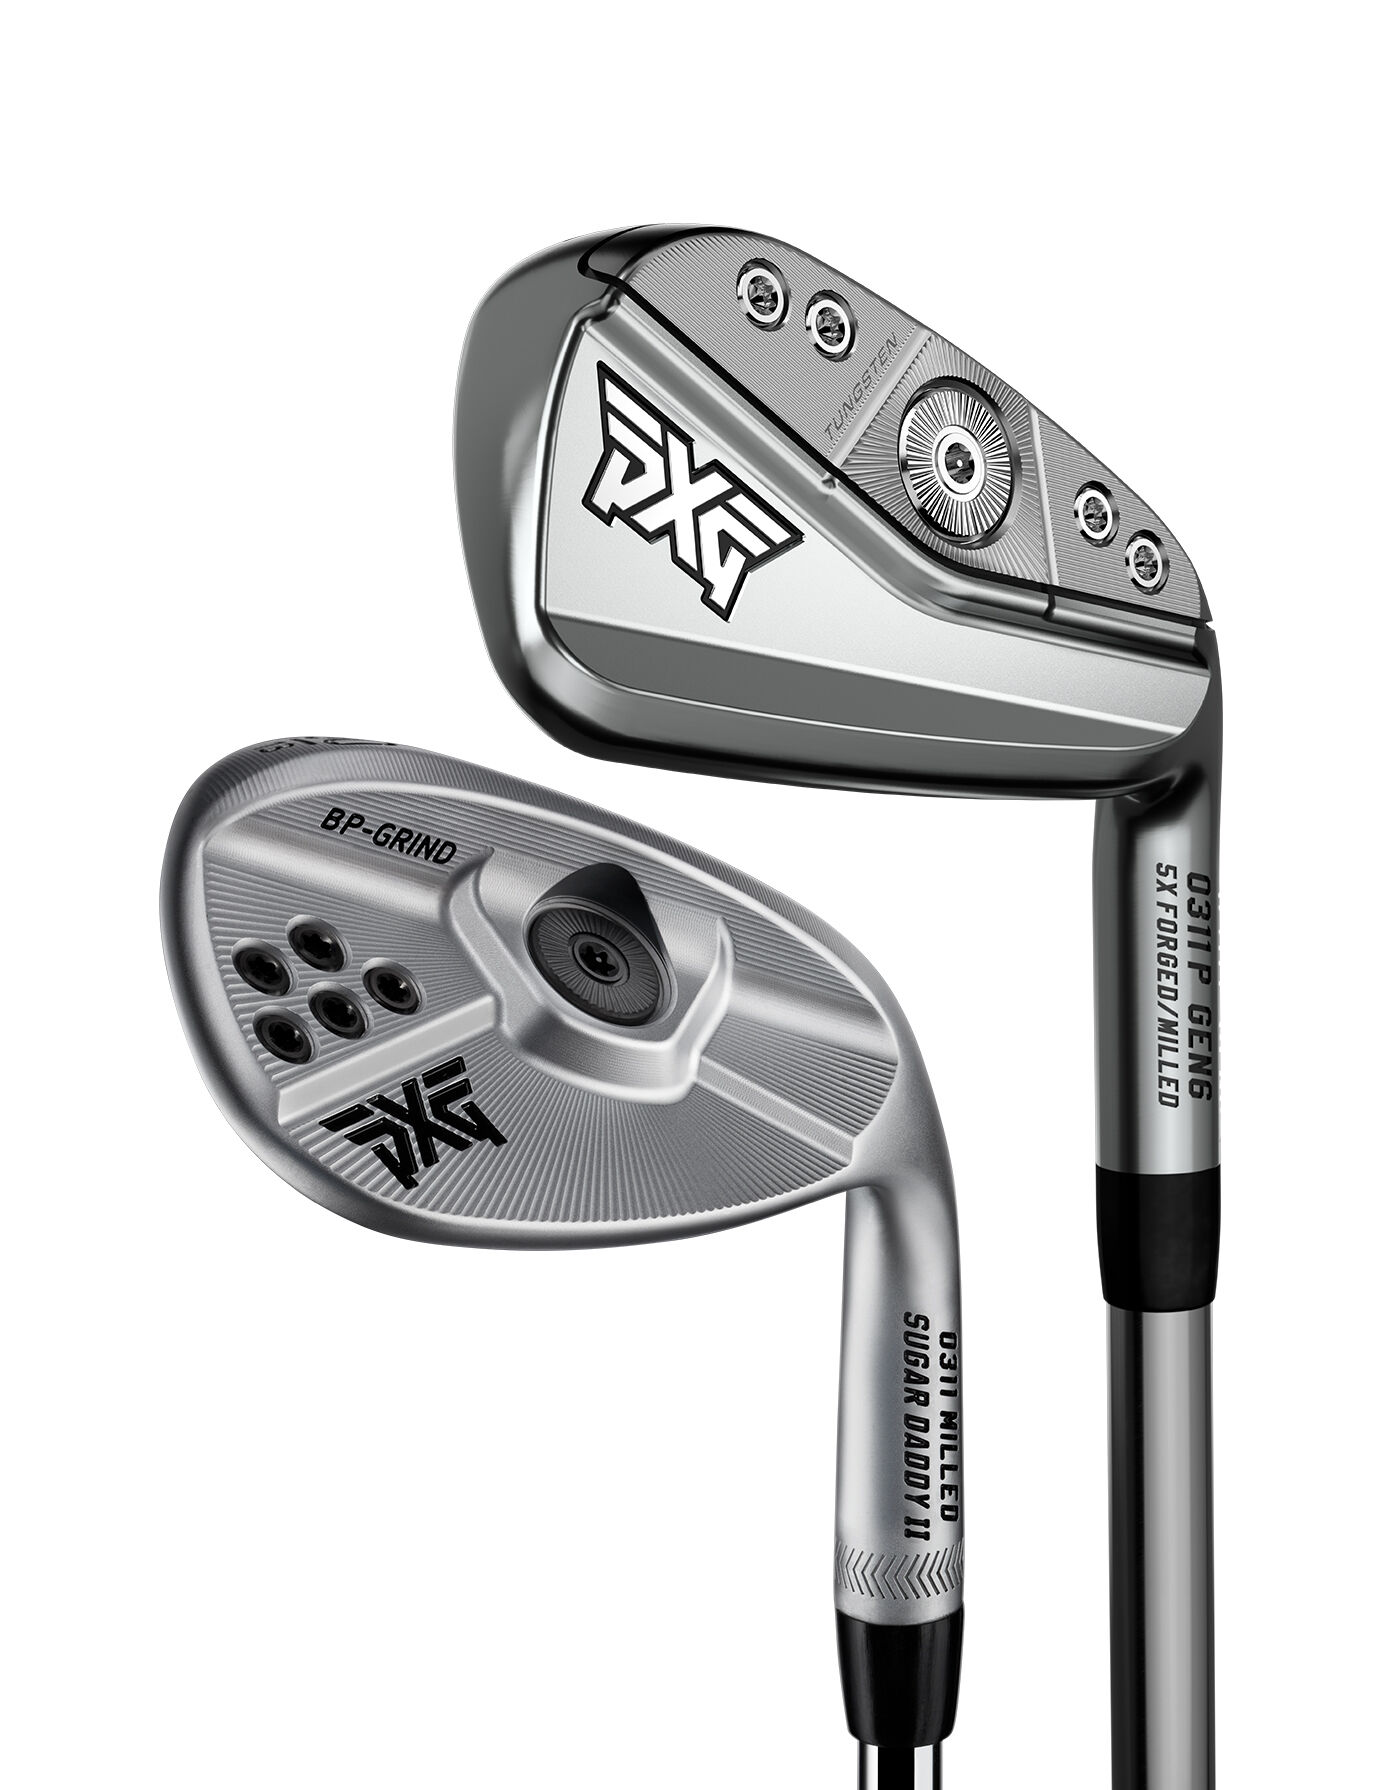 Buy GEN6 0311 P Irons 7-PW, G-Double Chrome, Sugar Daddy II Wedges 